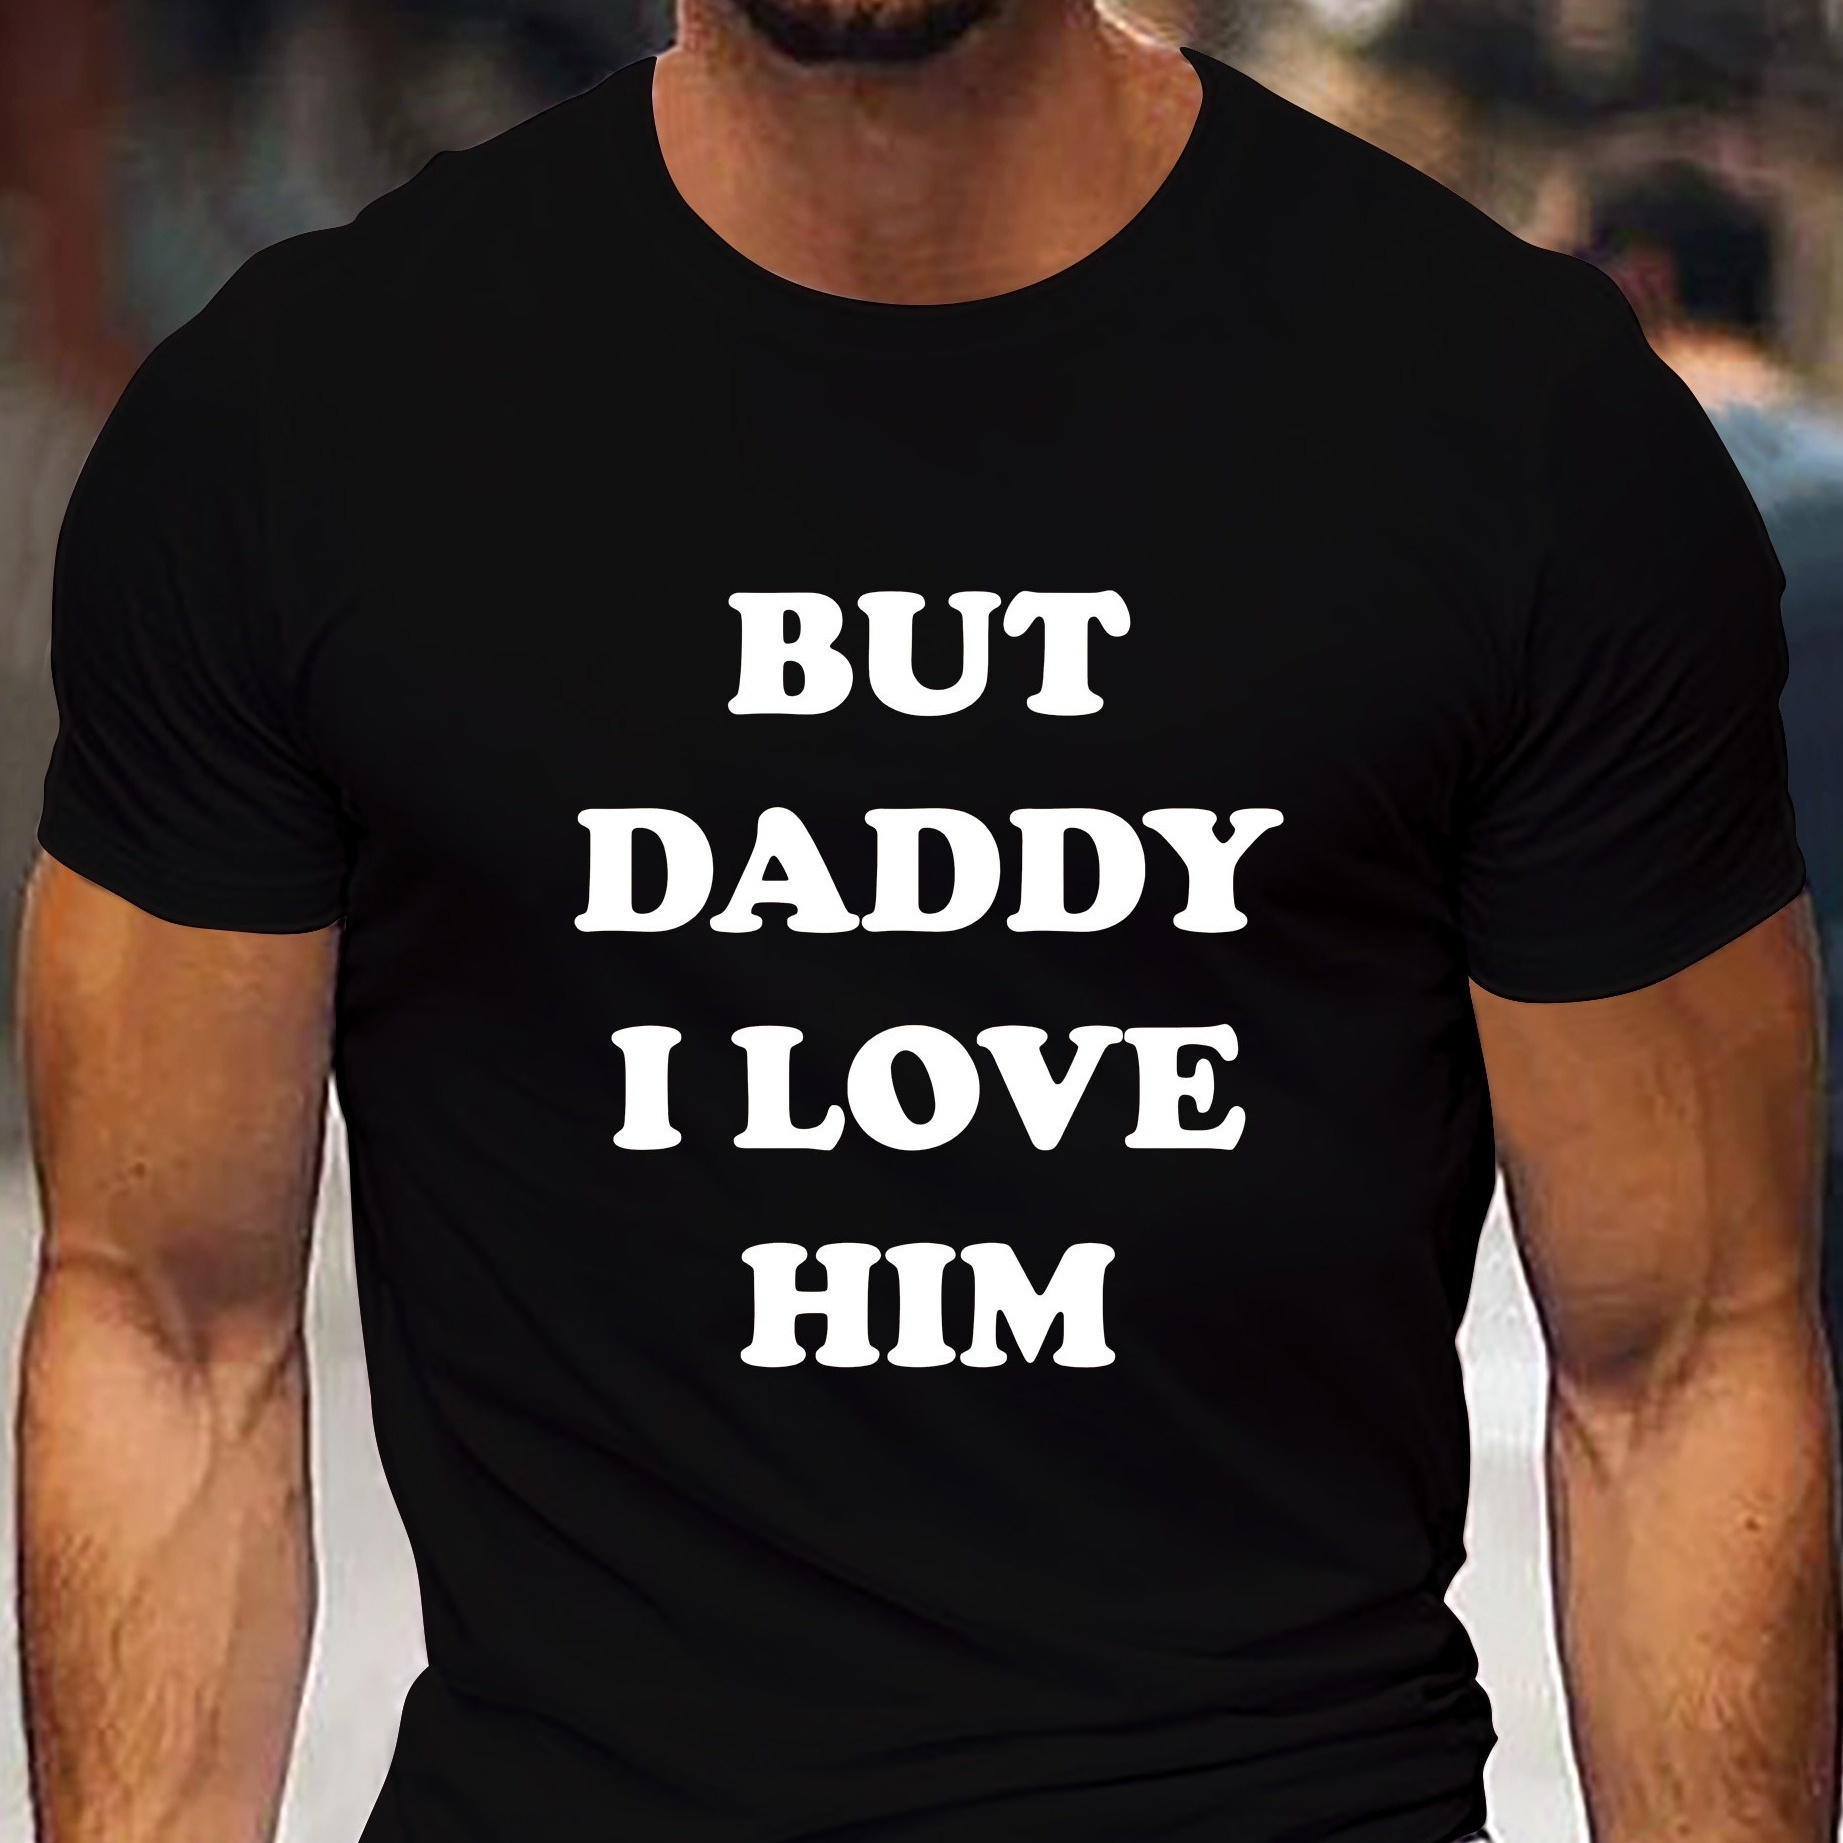 

But Daddy I Love Him Print Tee Shirt, Tees For Men, Casual Short Sleeve T-shirt For Summer